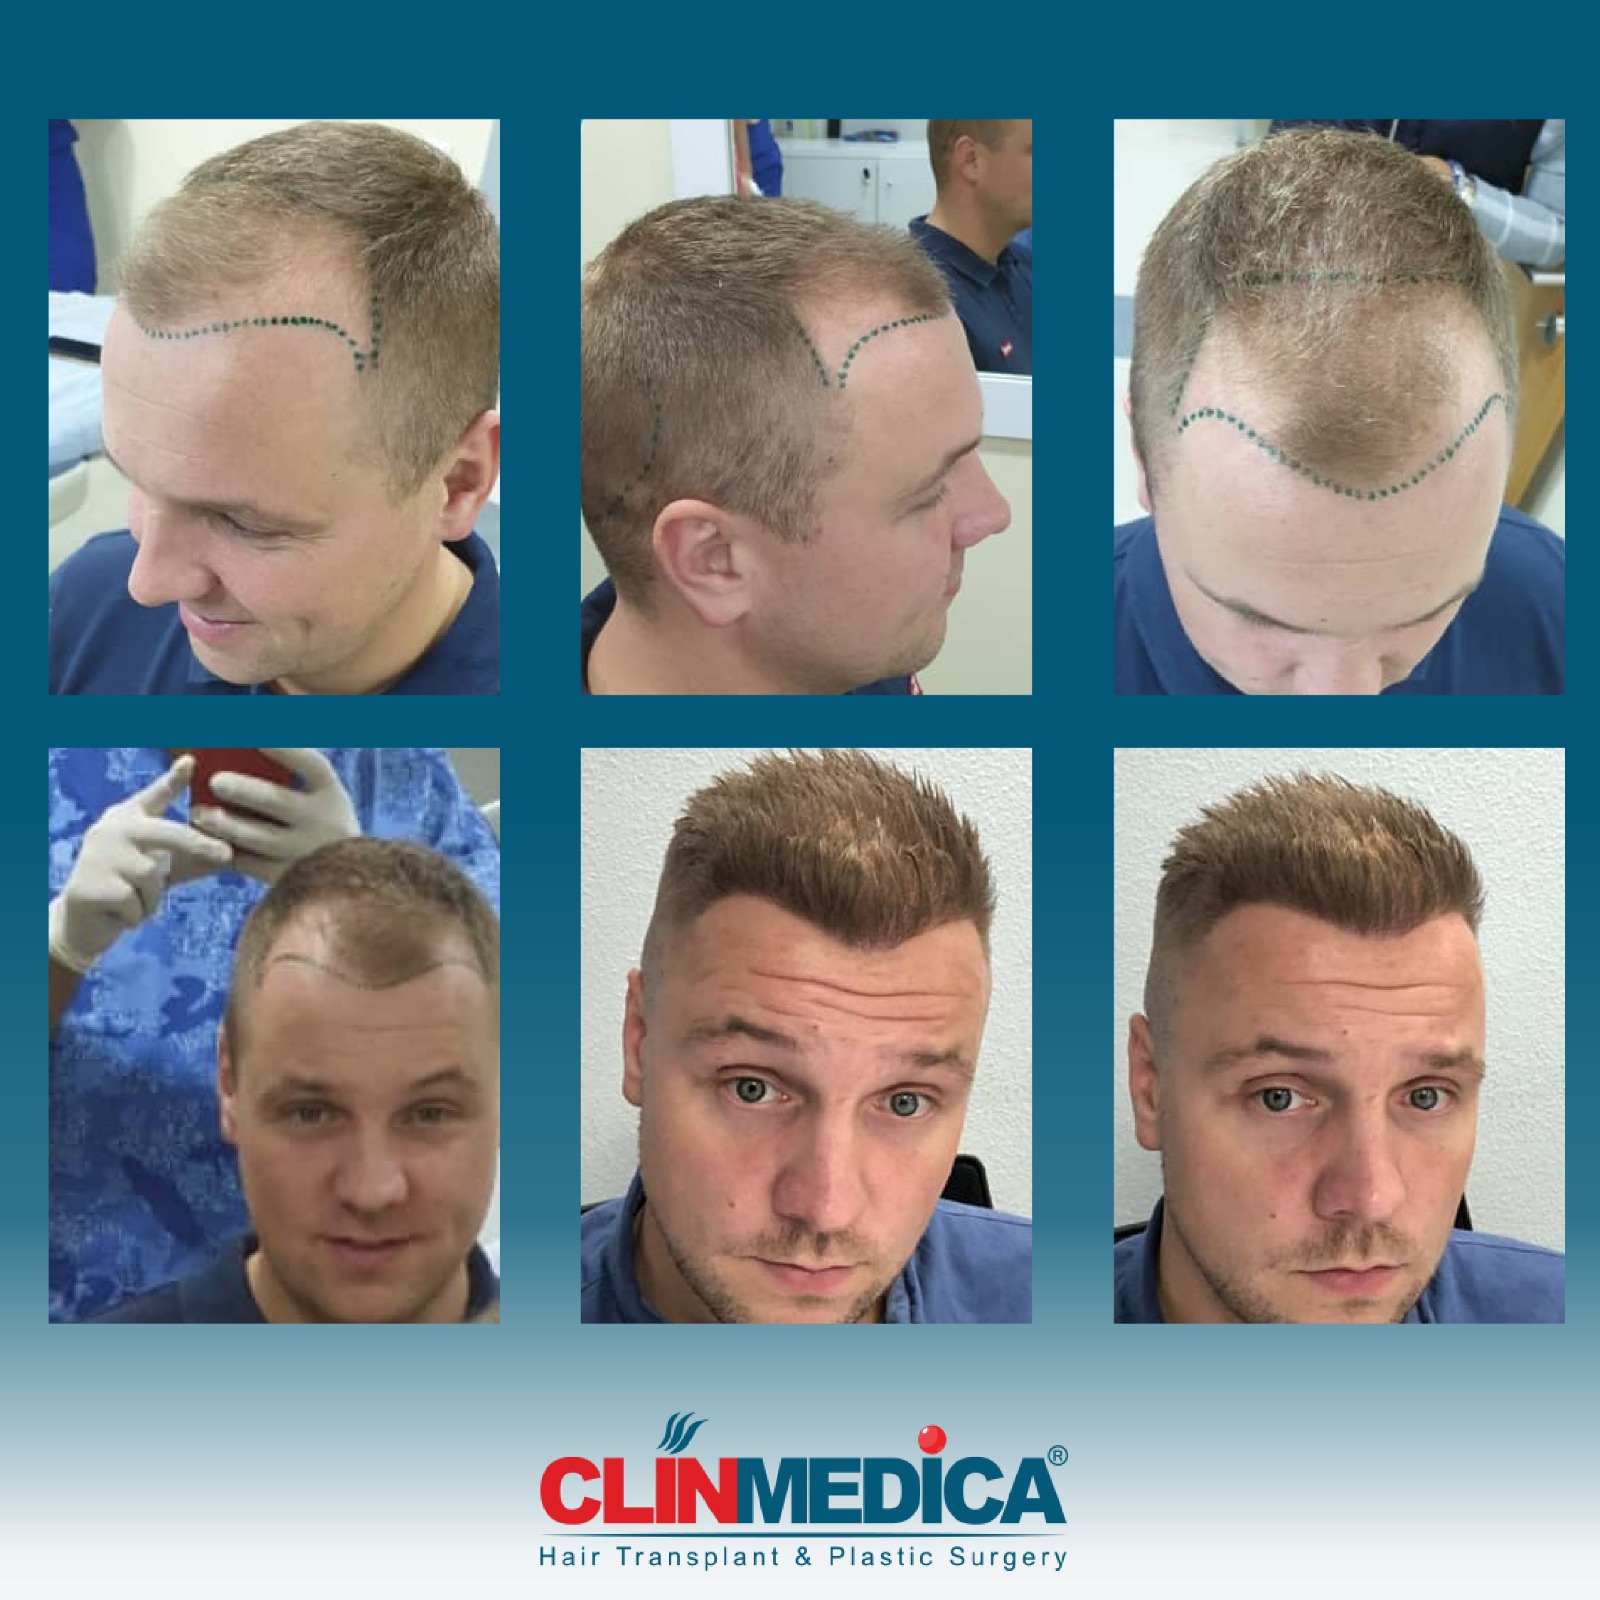 Hair_Transplant_Turkey_before_After_Clinmedica